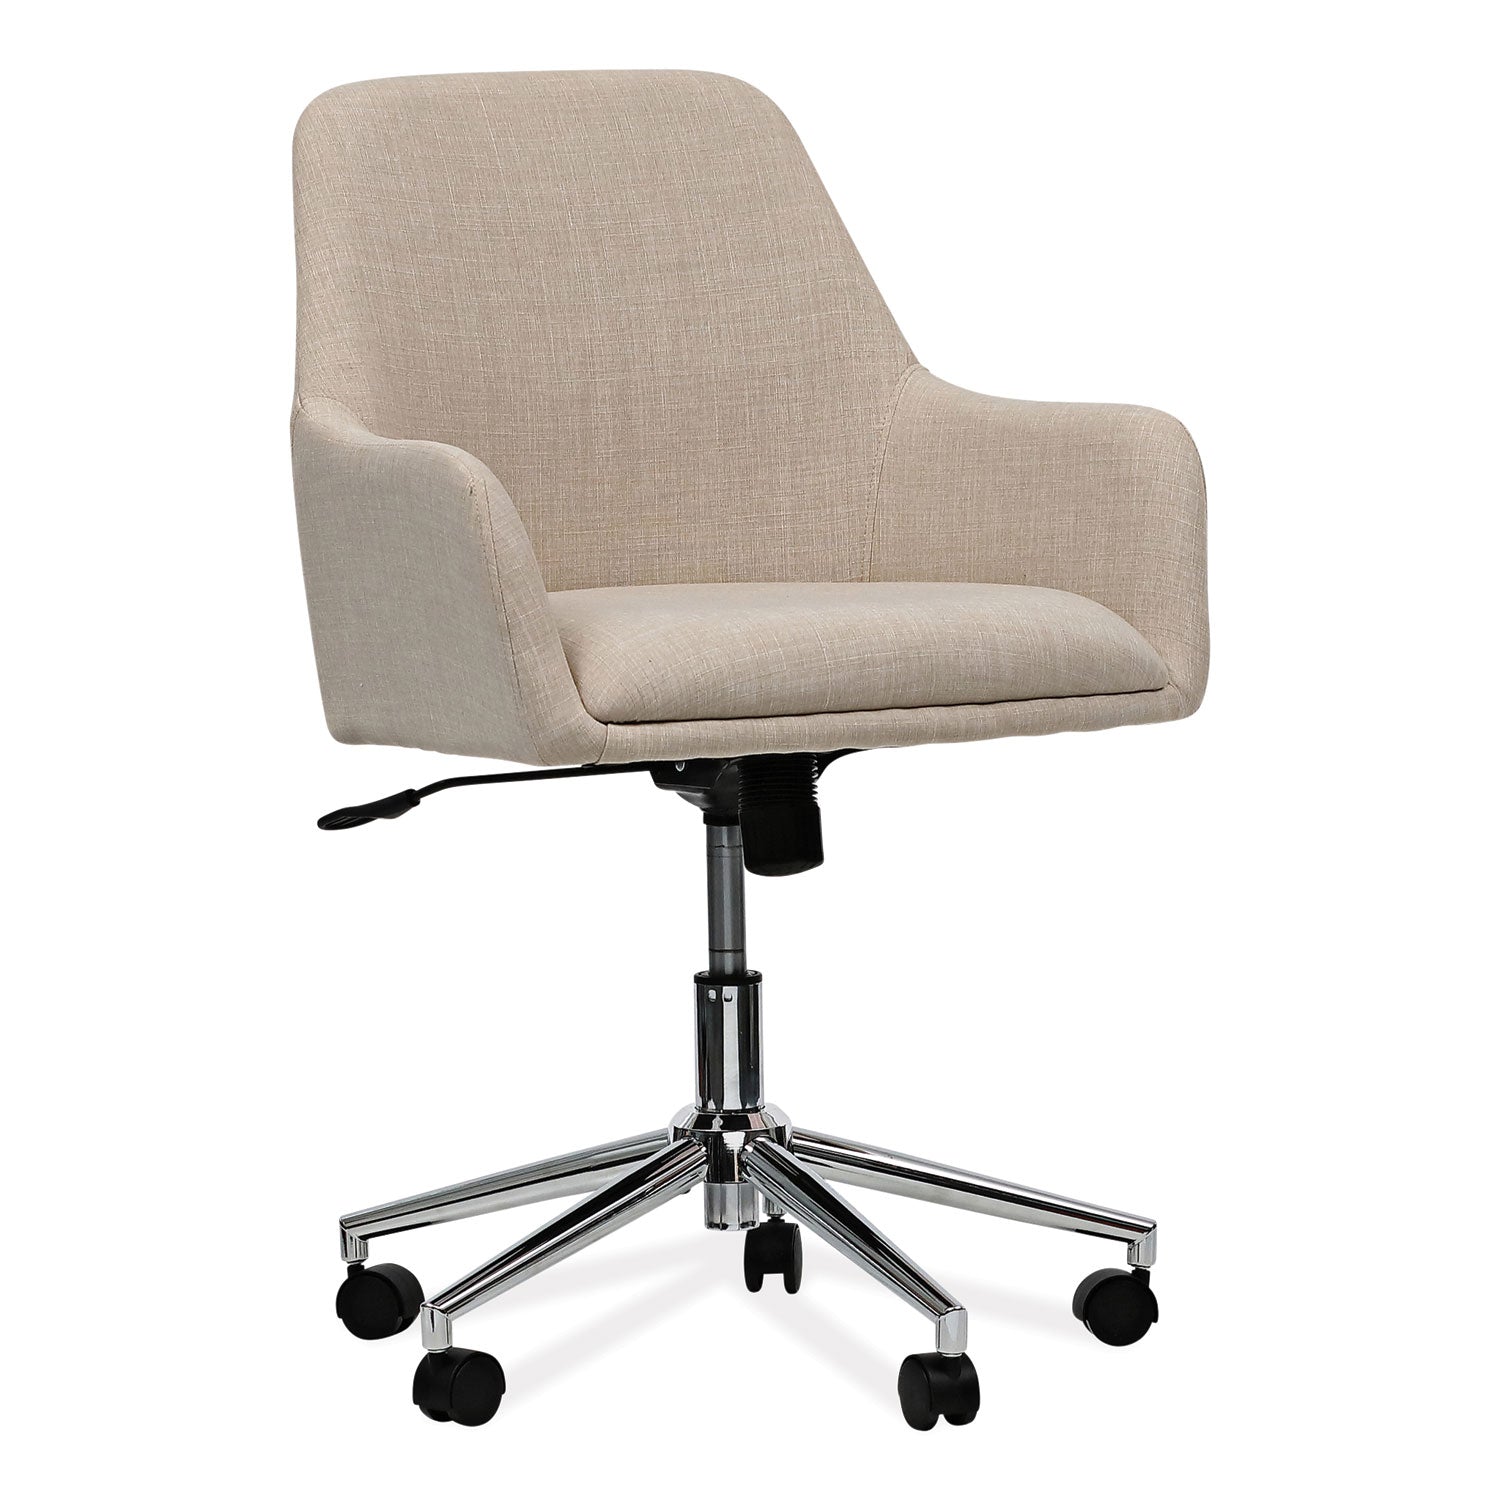 mid-century-task-chair-supports-up-to-275-lb-189-to-2224-seat-height-cream-seat-cream-back_alews4251 - 1